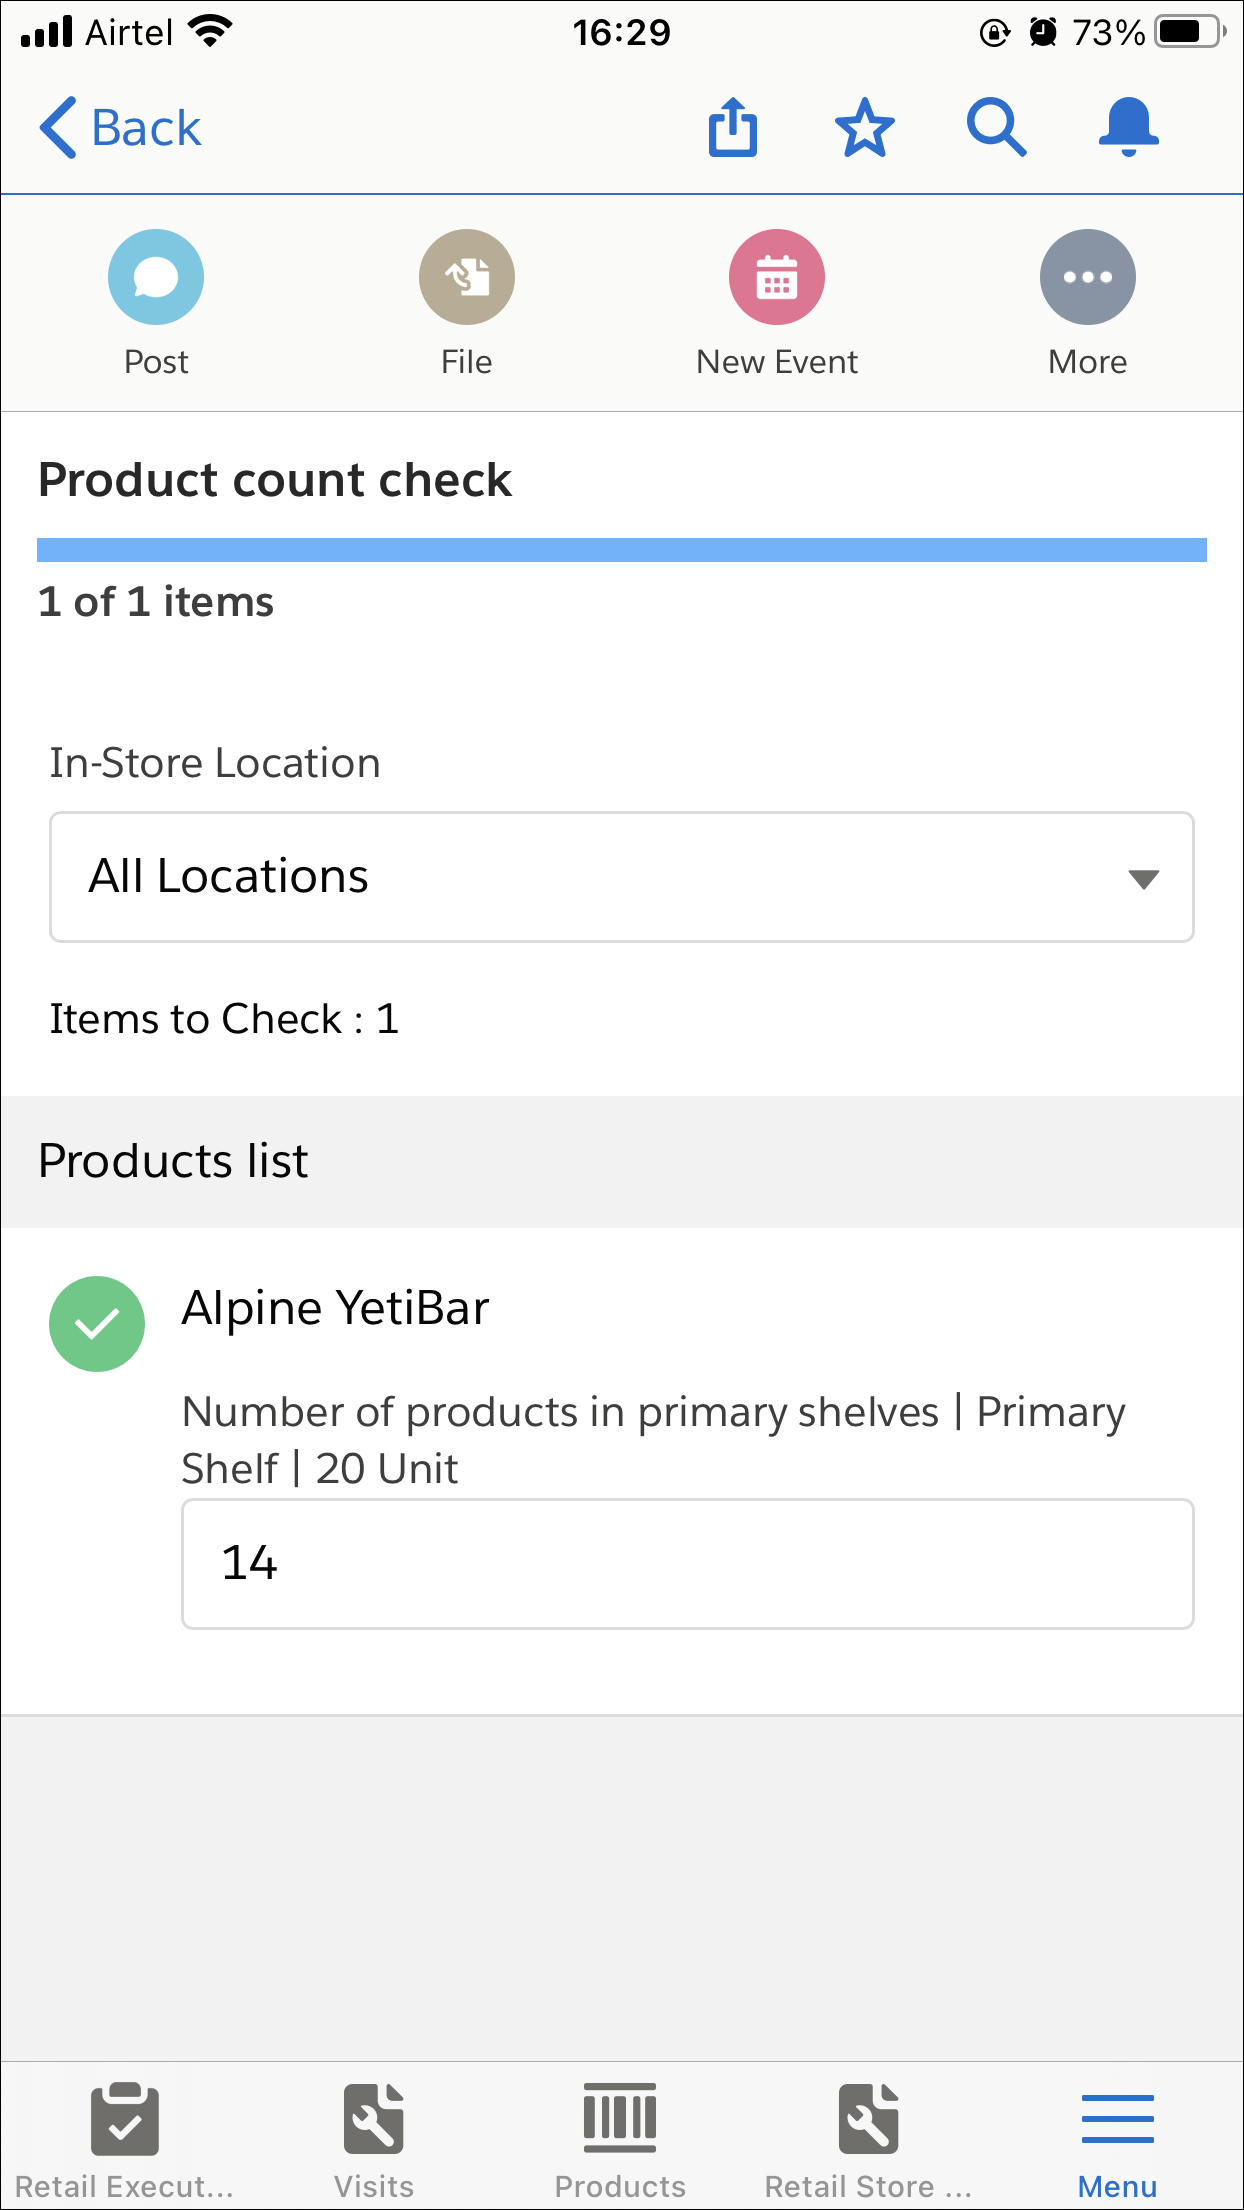 The Inventory Check task on the mobile with compliance check questions.